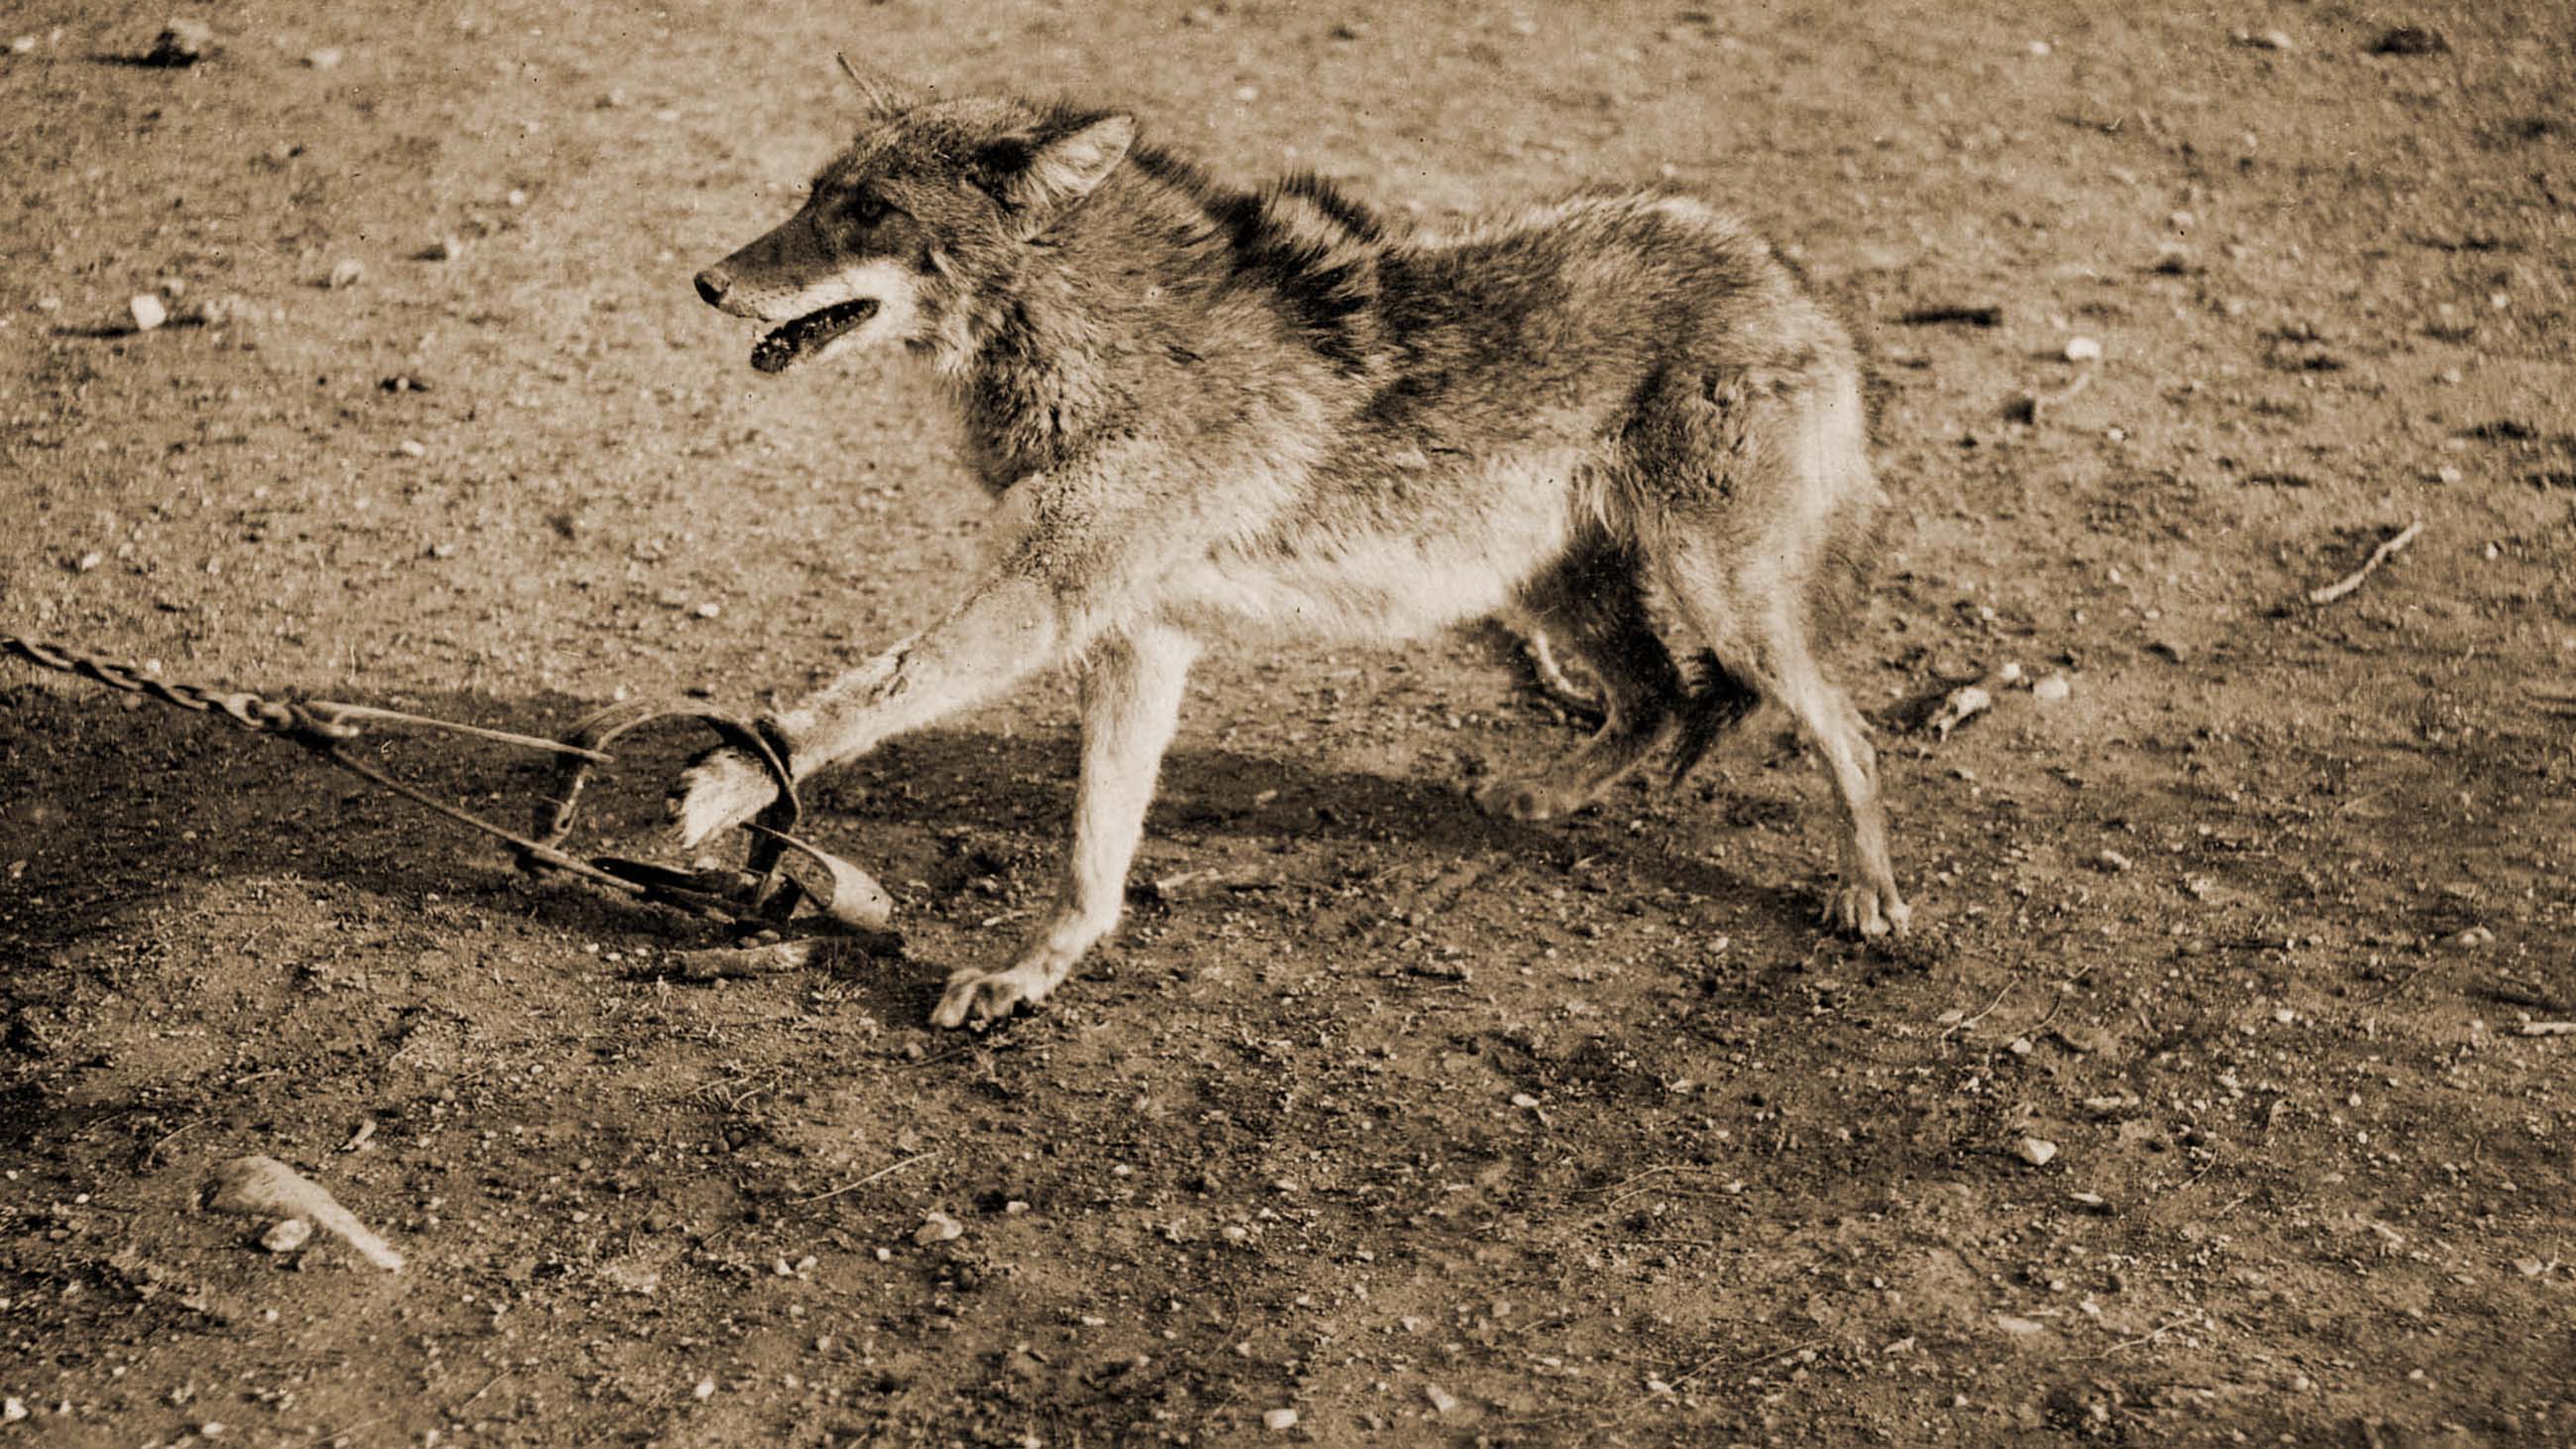 A coyote with its paw caught in a trap. Photograph taken circa 1918 for Vernon Orlando Bailey during his work as field naturalist.